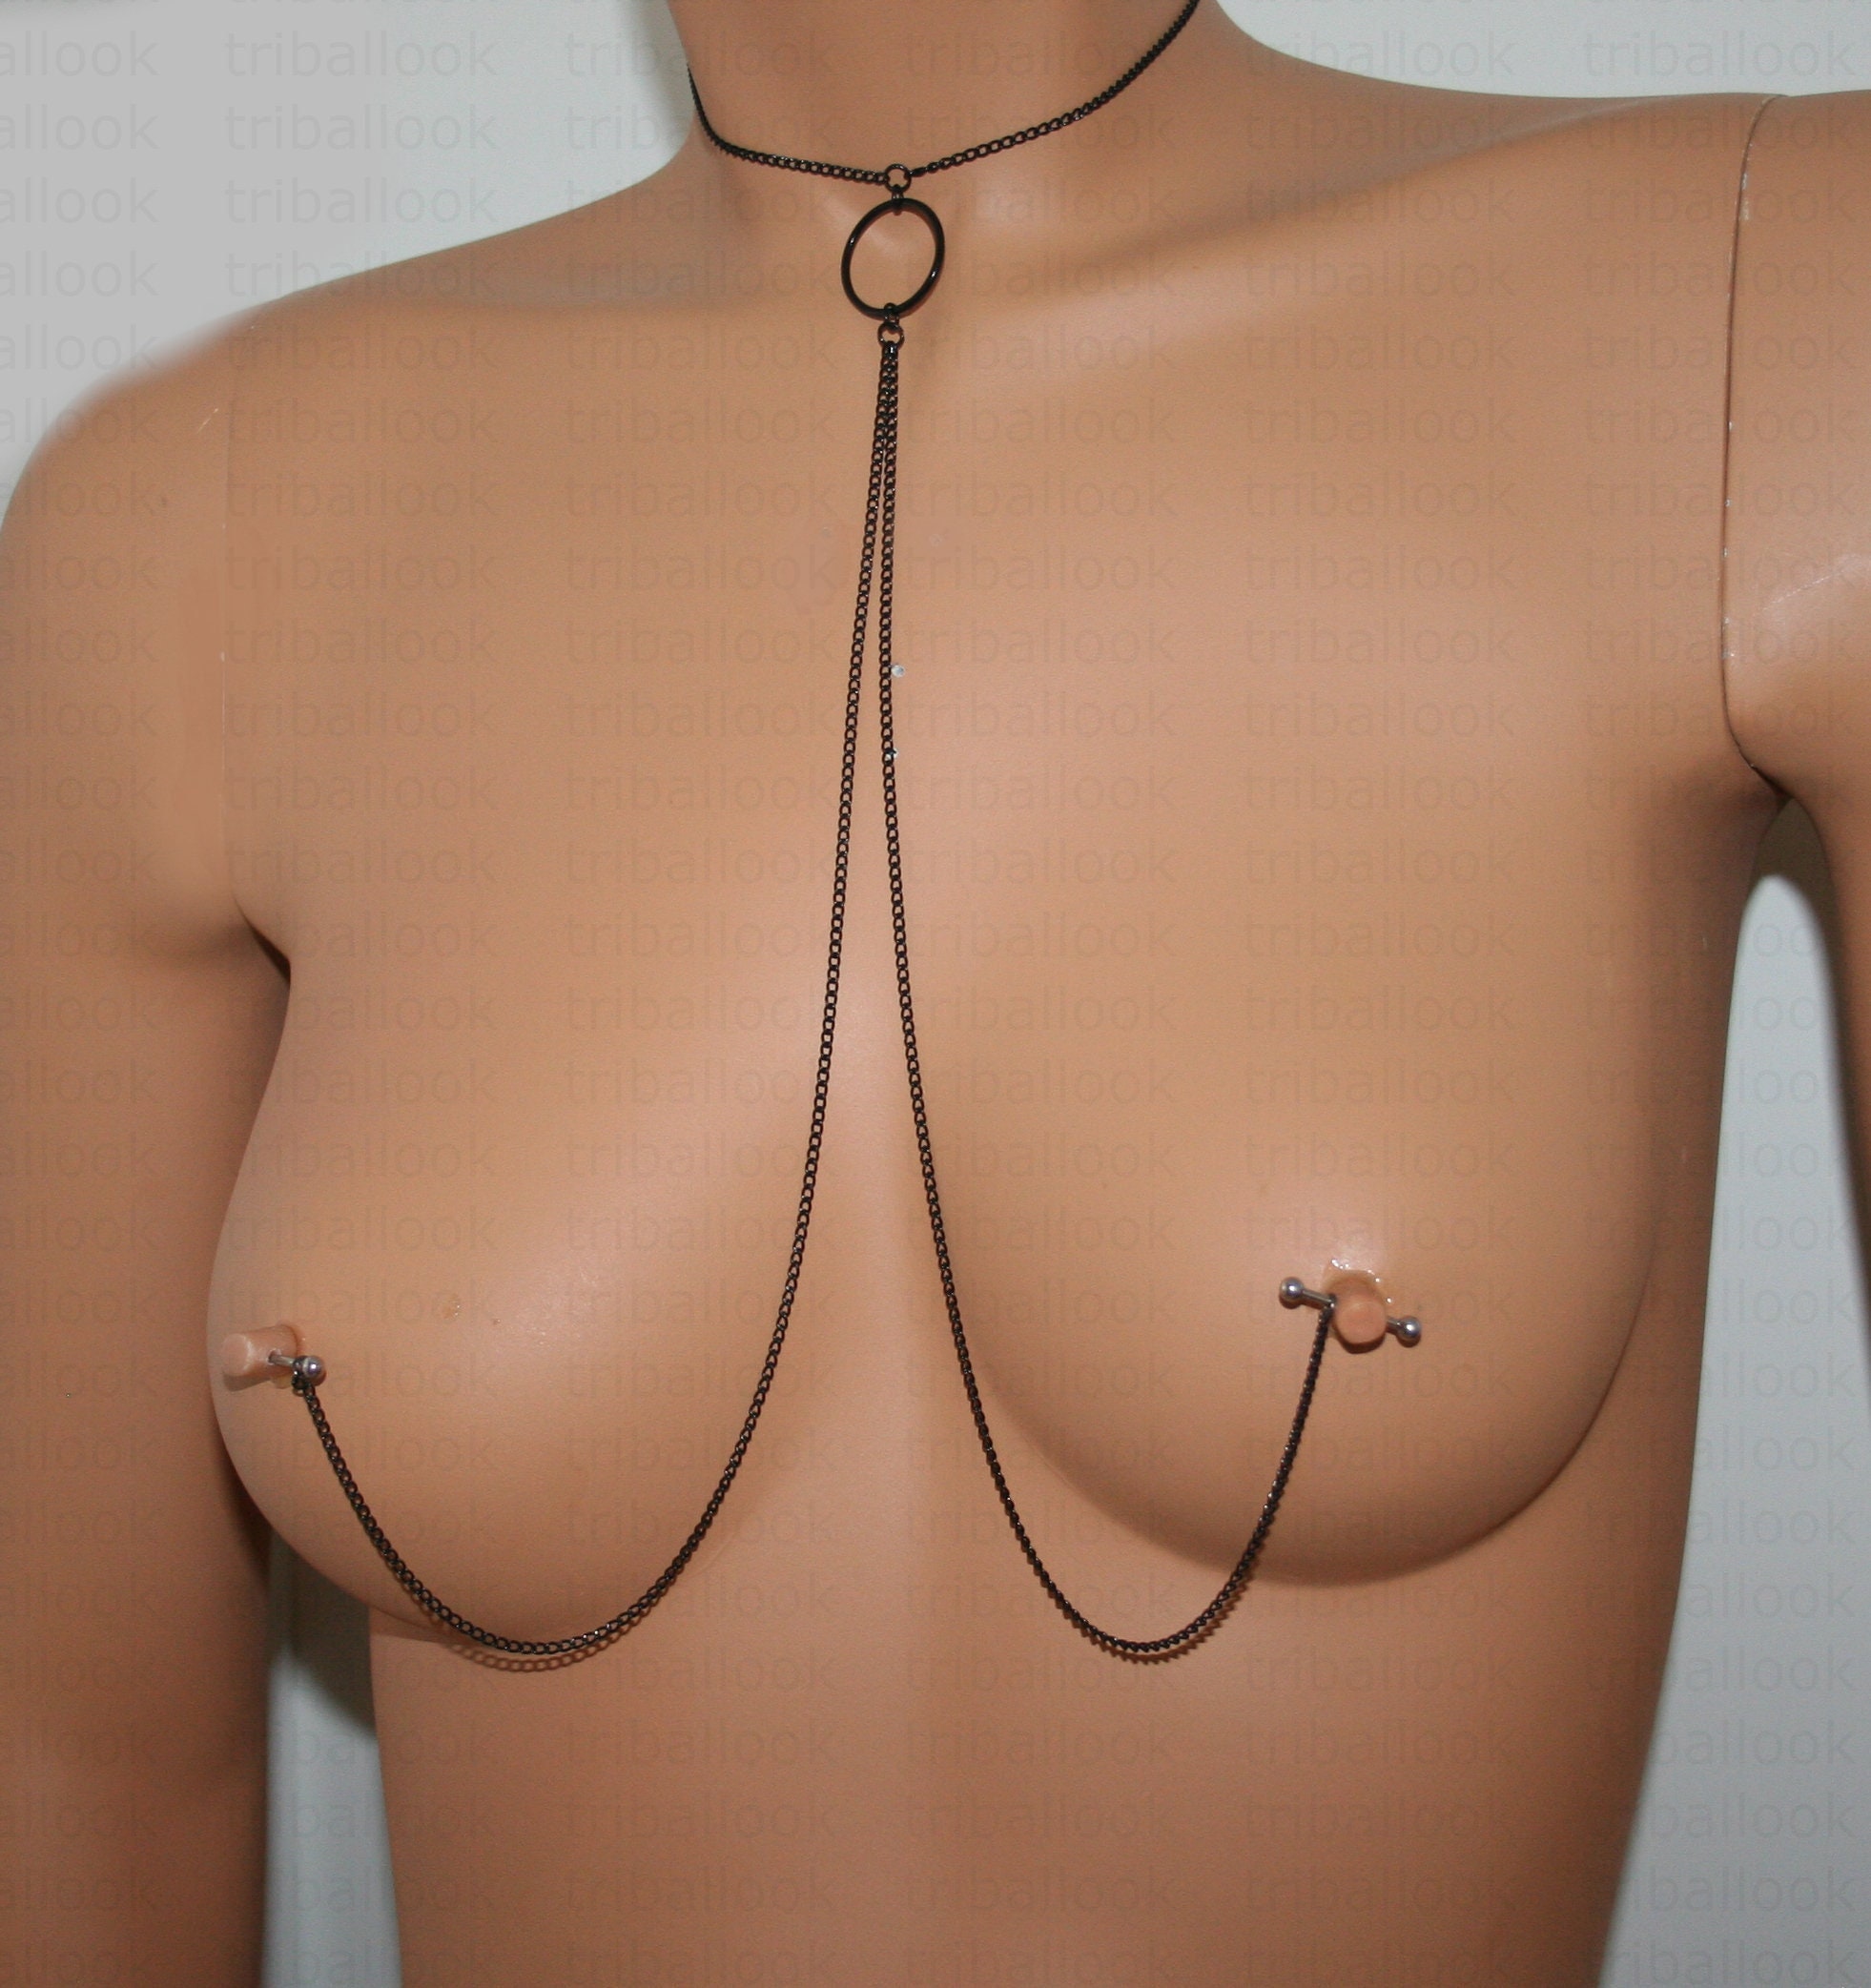 Jewelry for Pierced Nipples With Black Chain